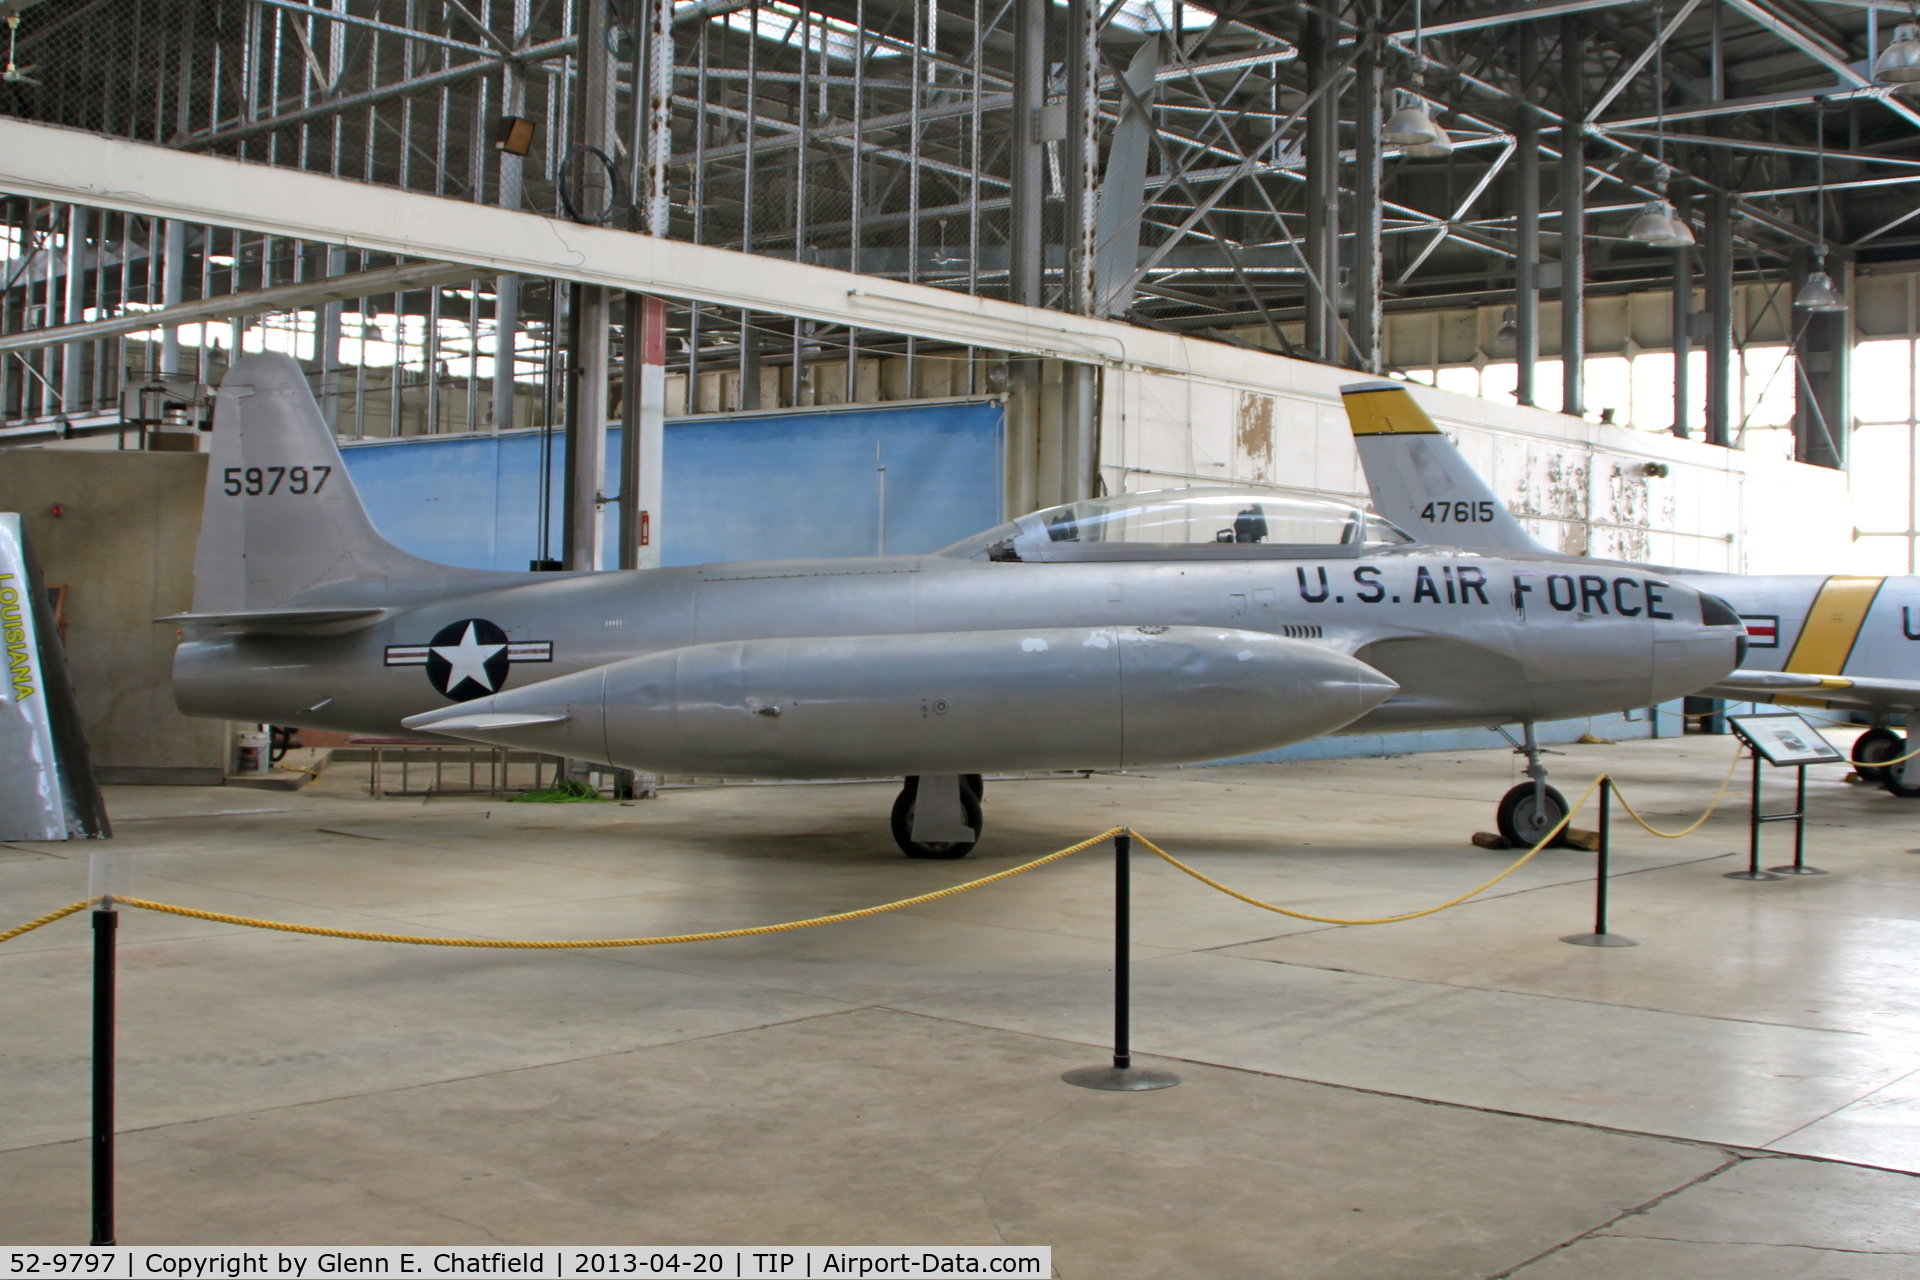 52-9797, 1952 Lockheed T-33A-1-LO Shooting Star C/N 580-8057, At the Chanute Air Museum